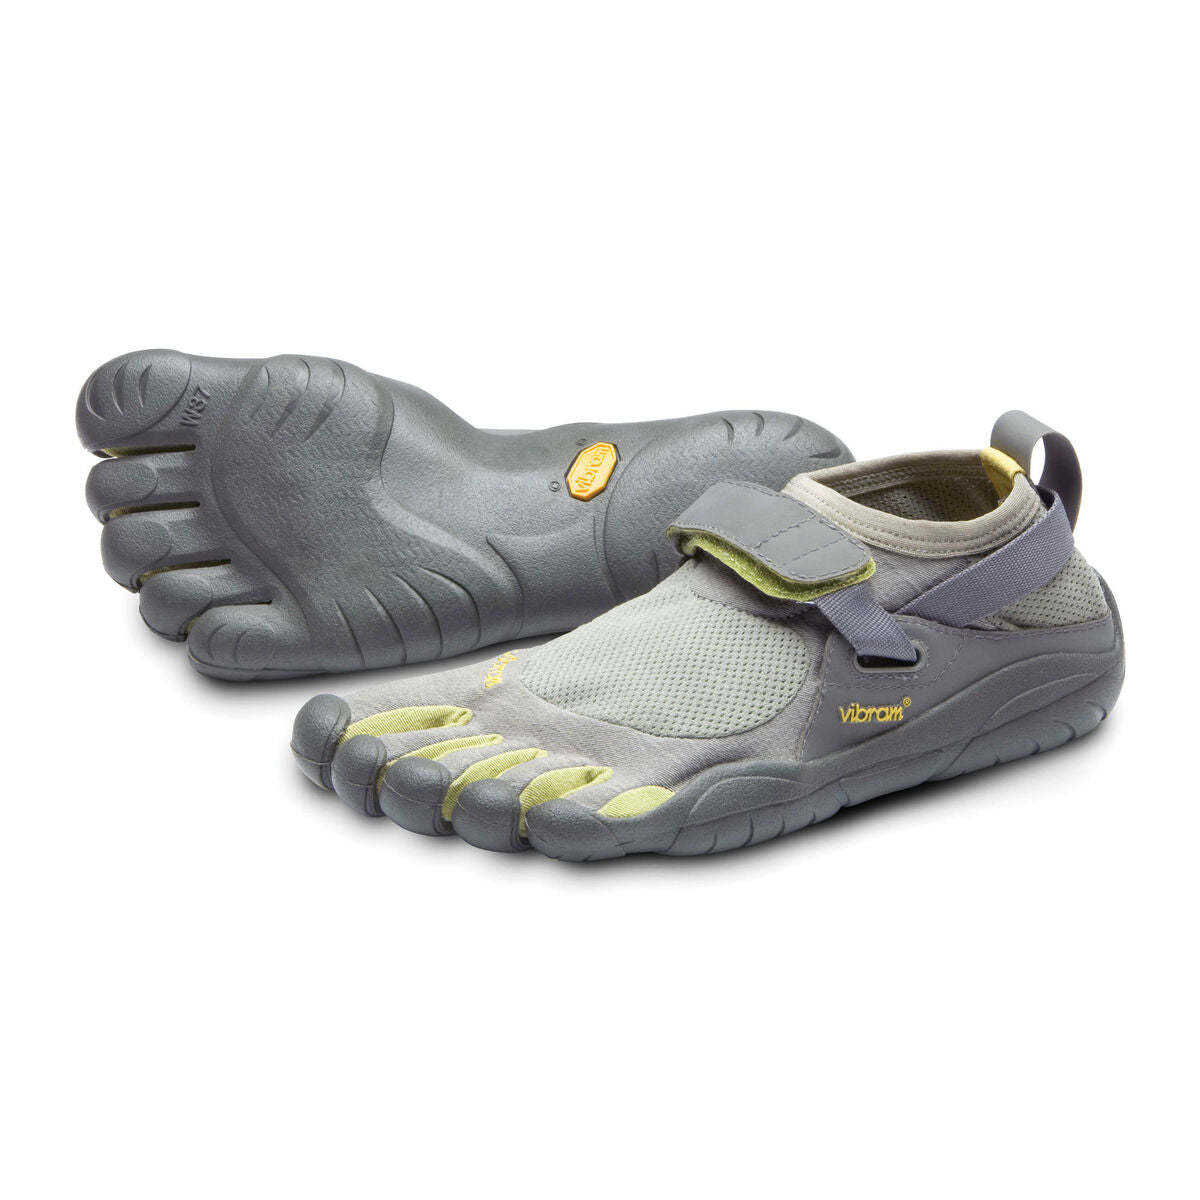 Men's Vibram Five Fingers KSO Training Shoe in Grey/Palm/Clay from the front